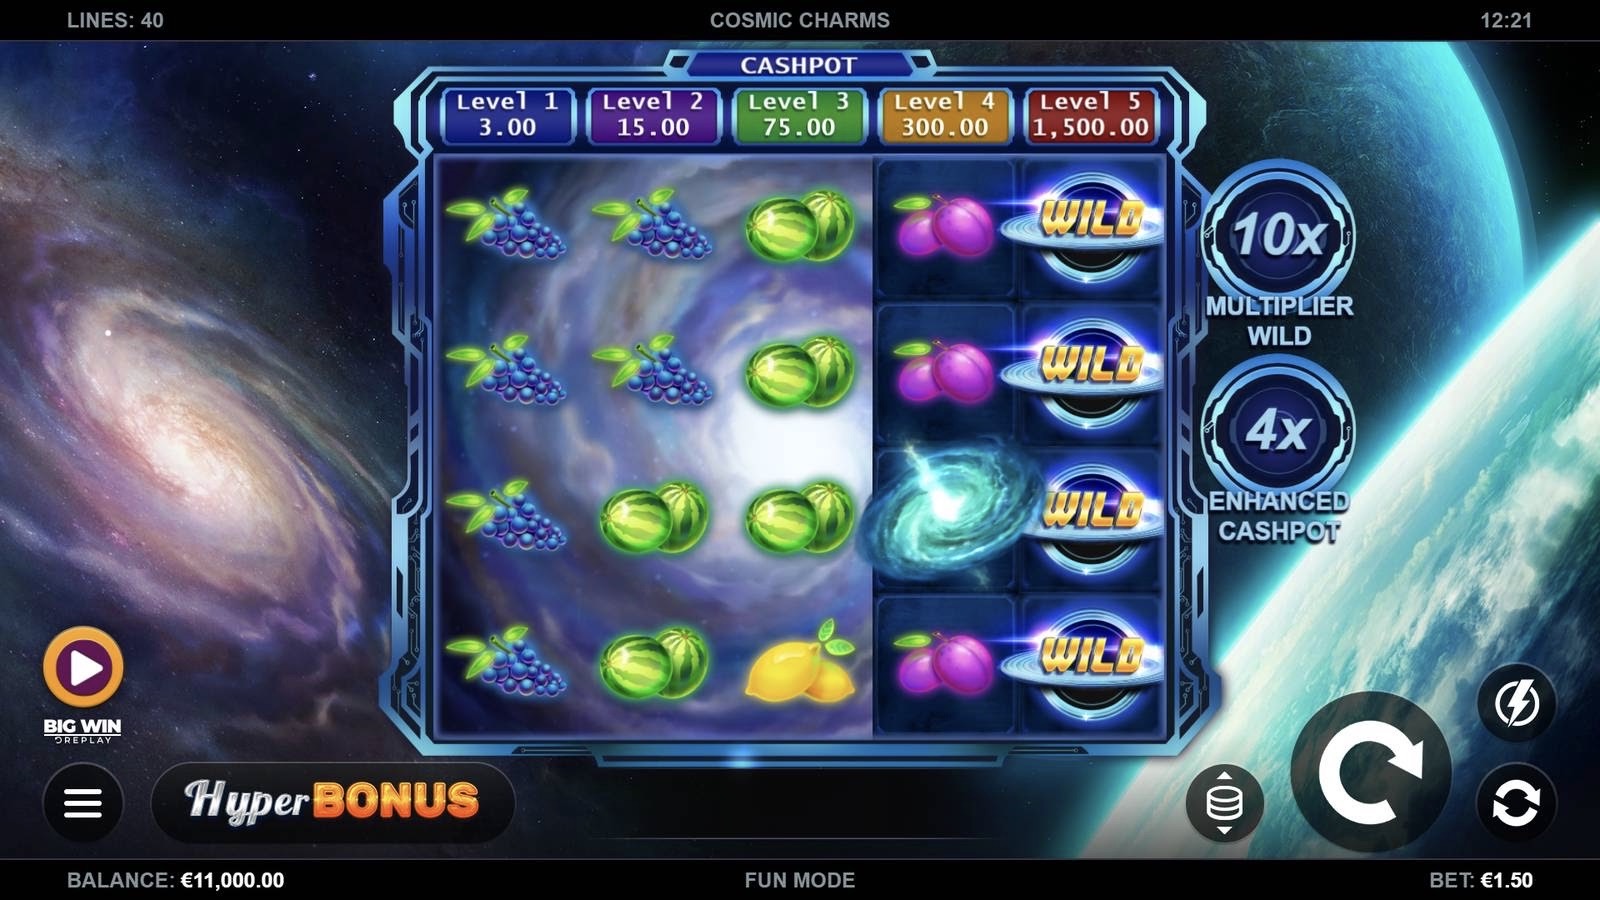 Cosmic Charms is a 5x4, 40-payline slot with features including free spins, wild symbols, scatter symbols and multipliers.